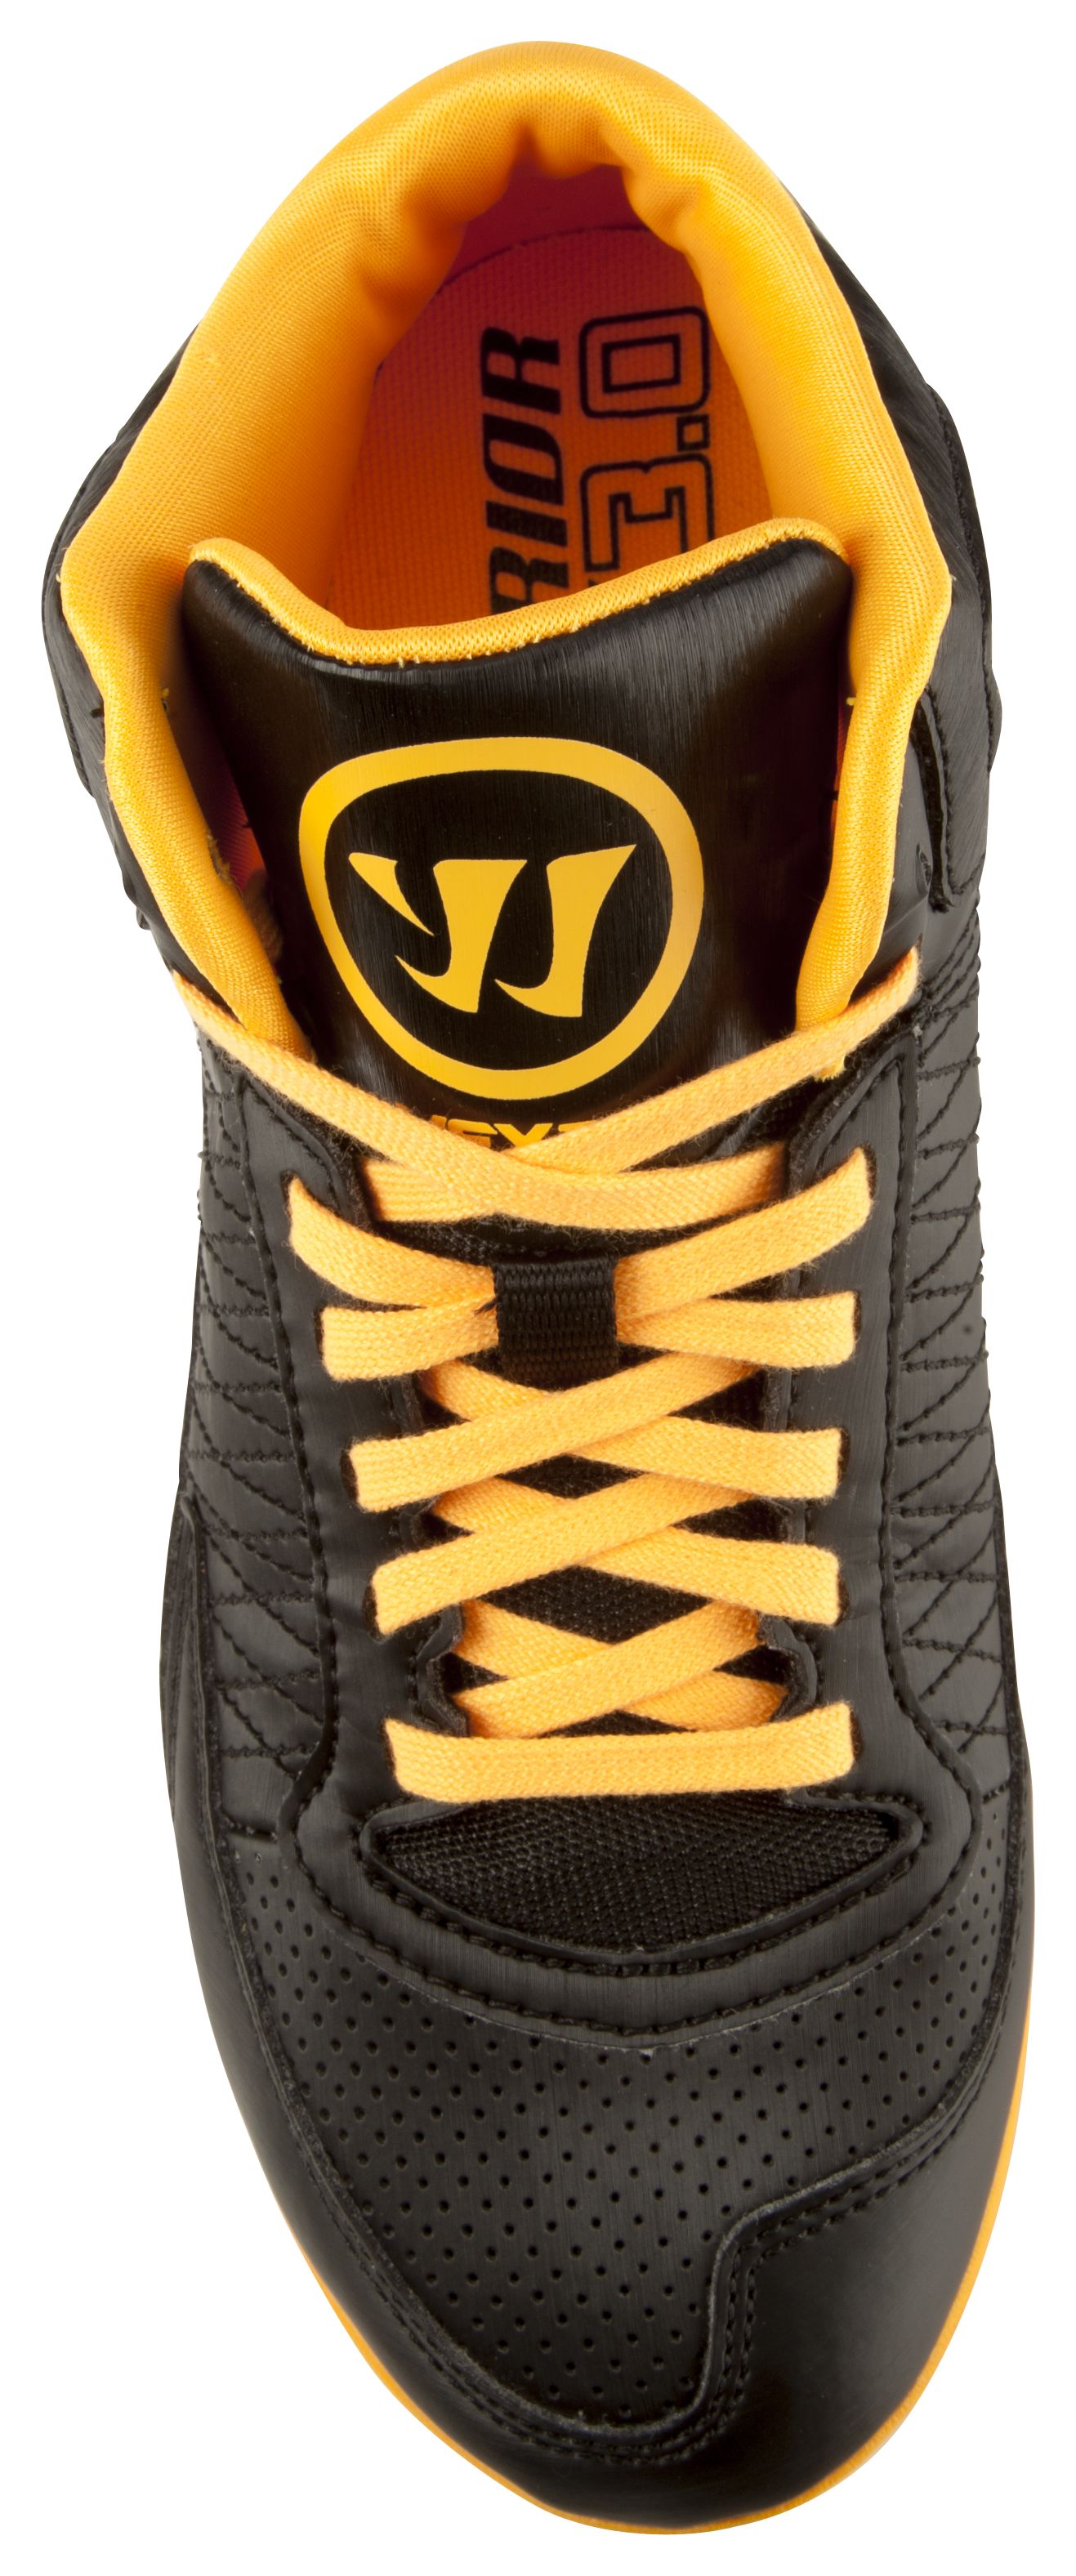 Vex 3.0 Youth Cleat, Black with Orange image number 0